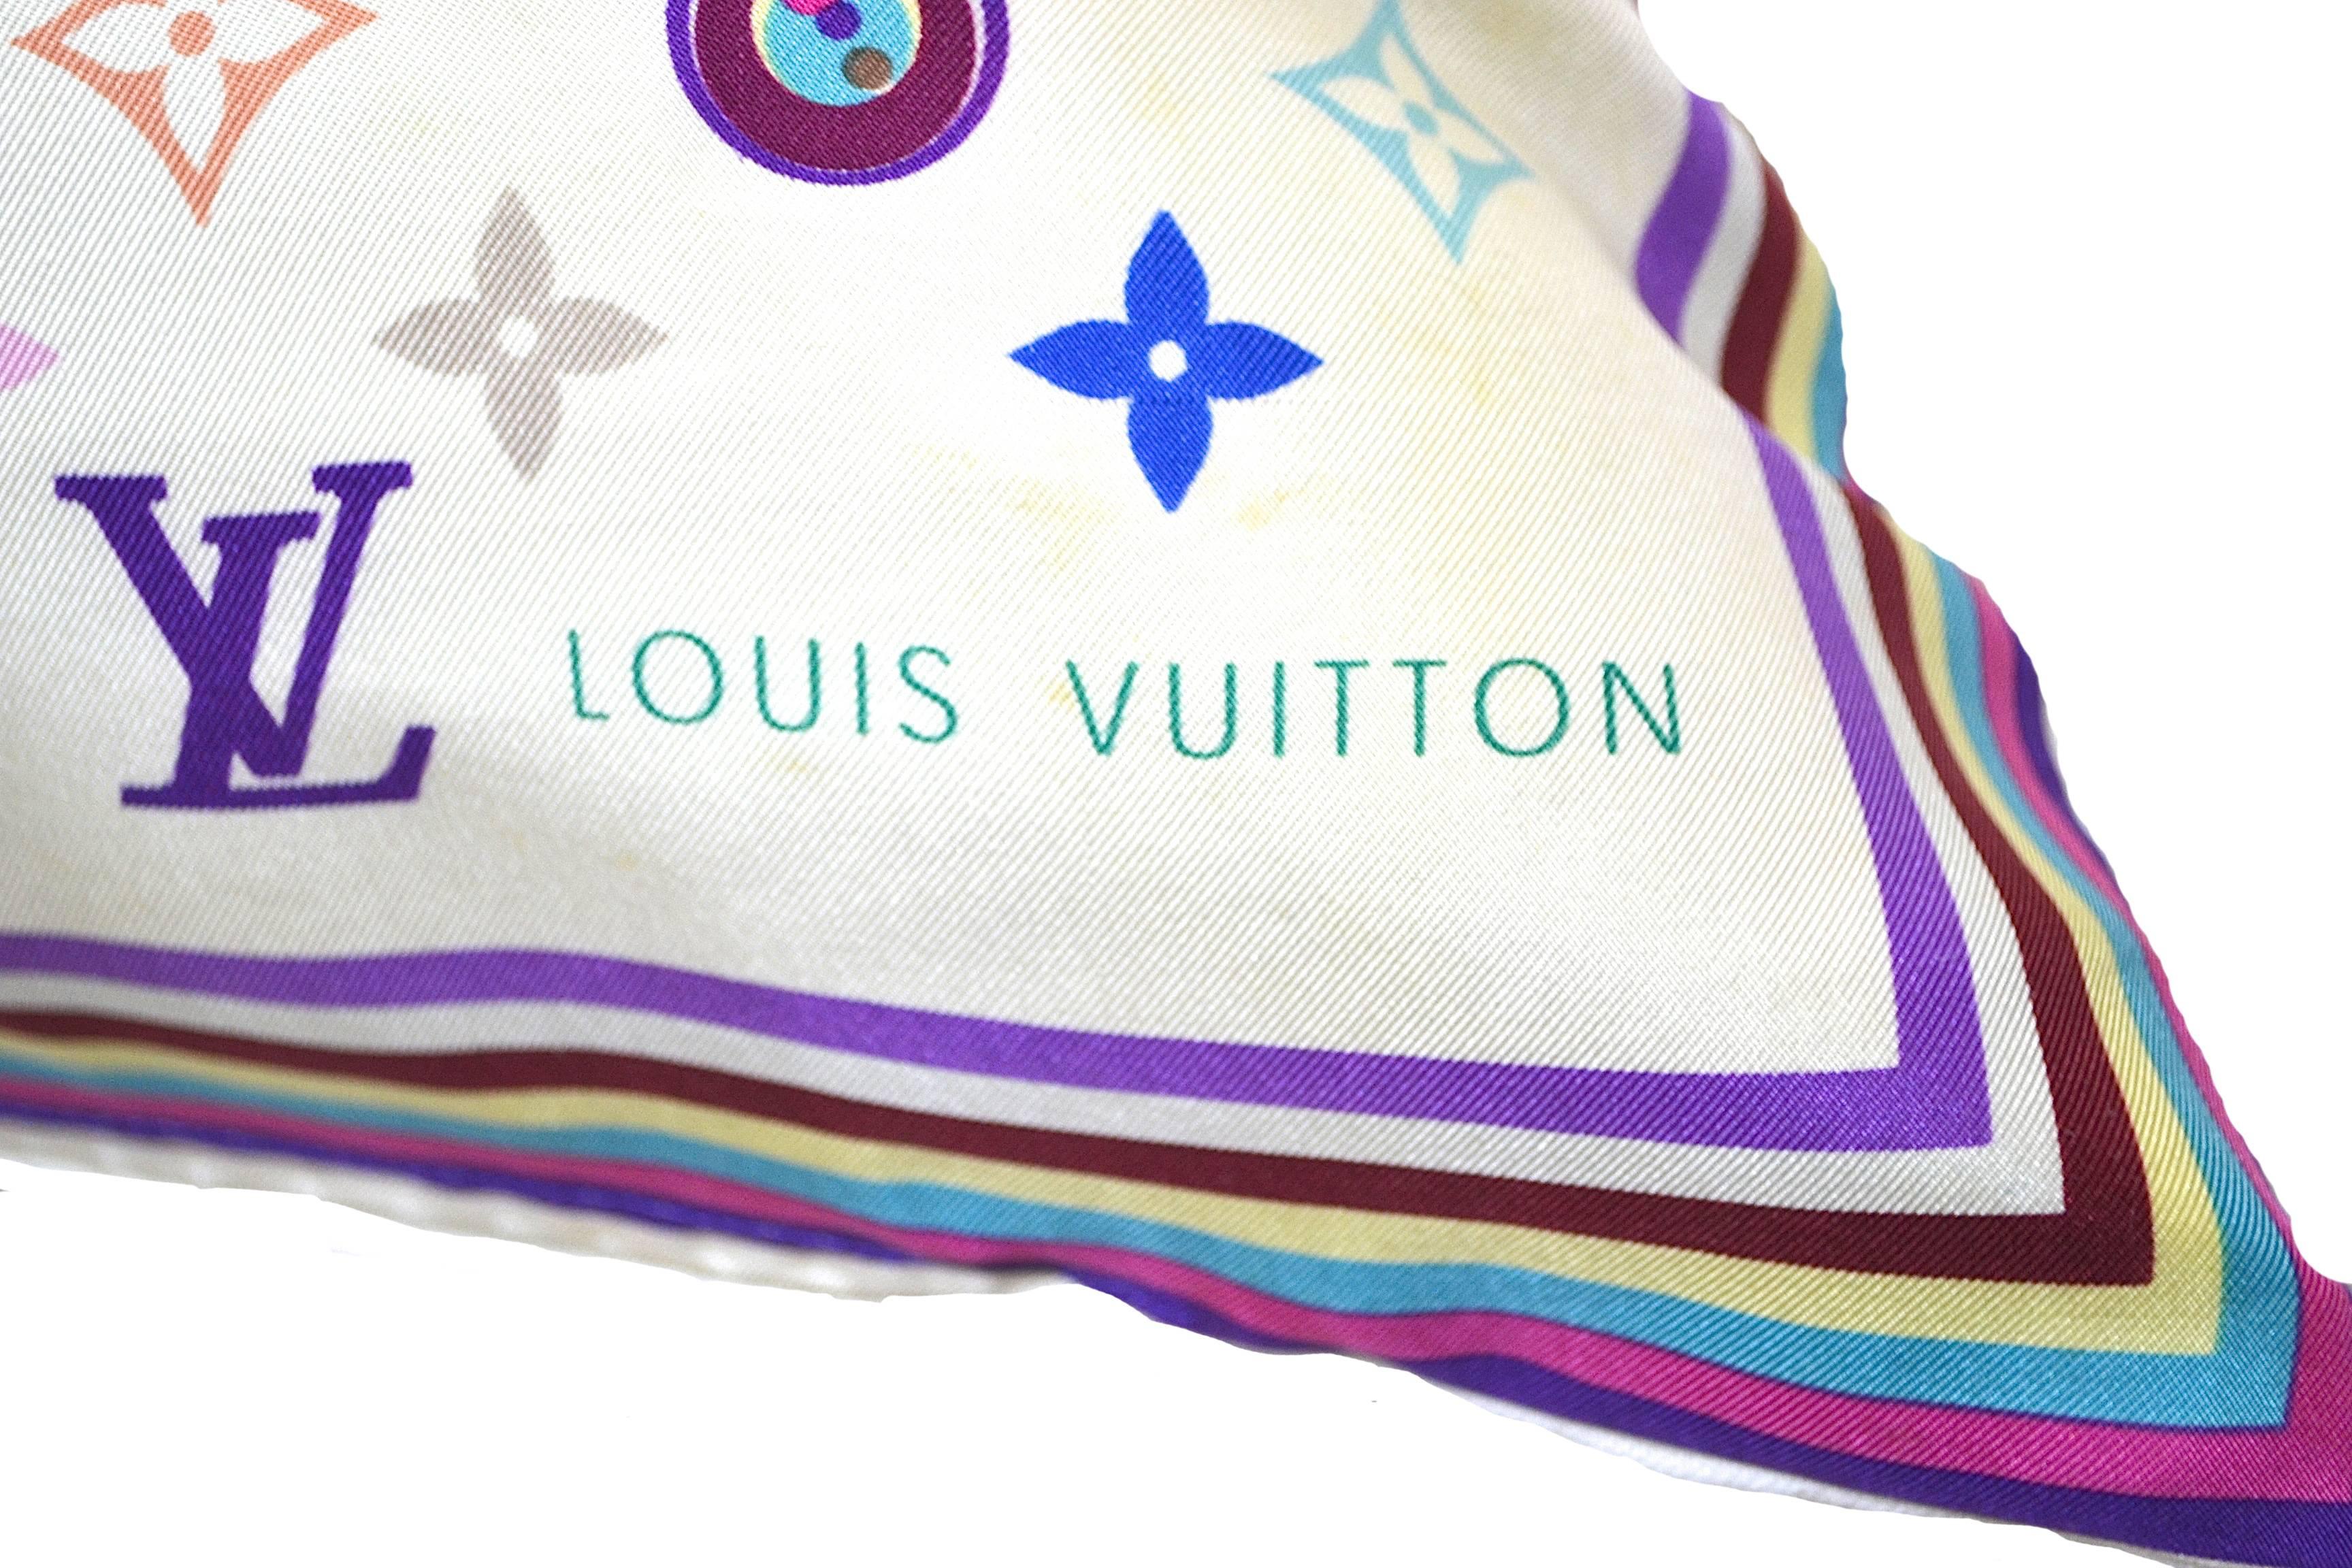 Made exclusively for iwatchjapan by Rita-Mari Couture. This elegant Louis Vuitton scarf pillow uses the highest quality items. This piece is entirely made in Japan and manufactured in an artisanal way, in which every step of the process is carefully